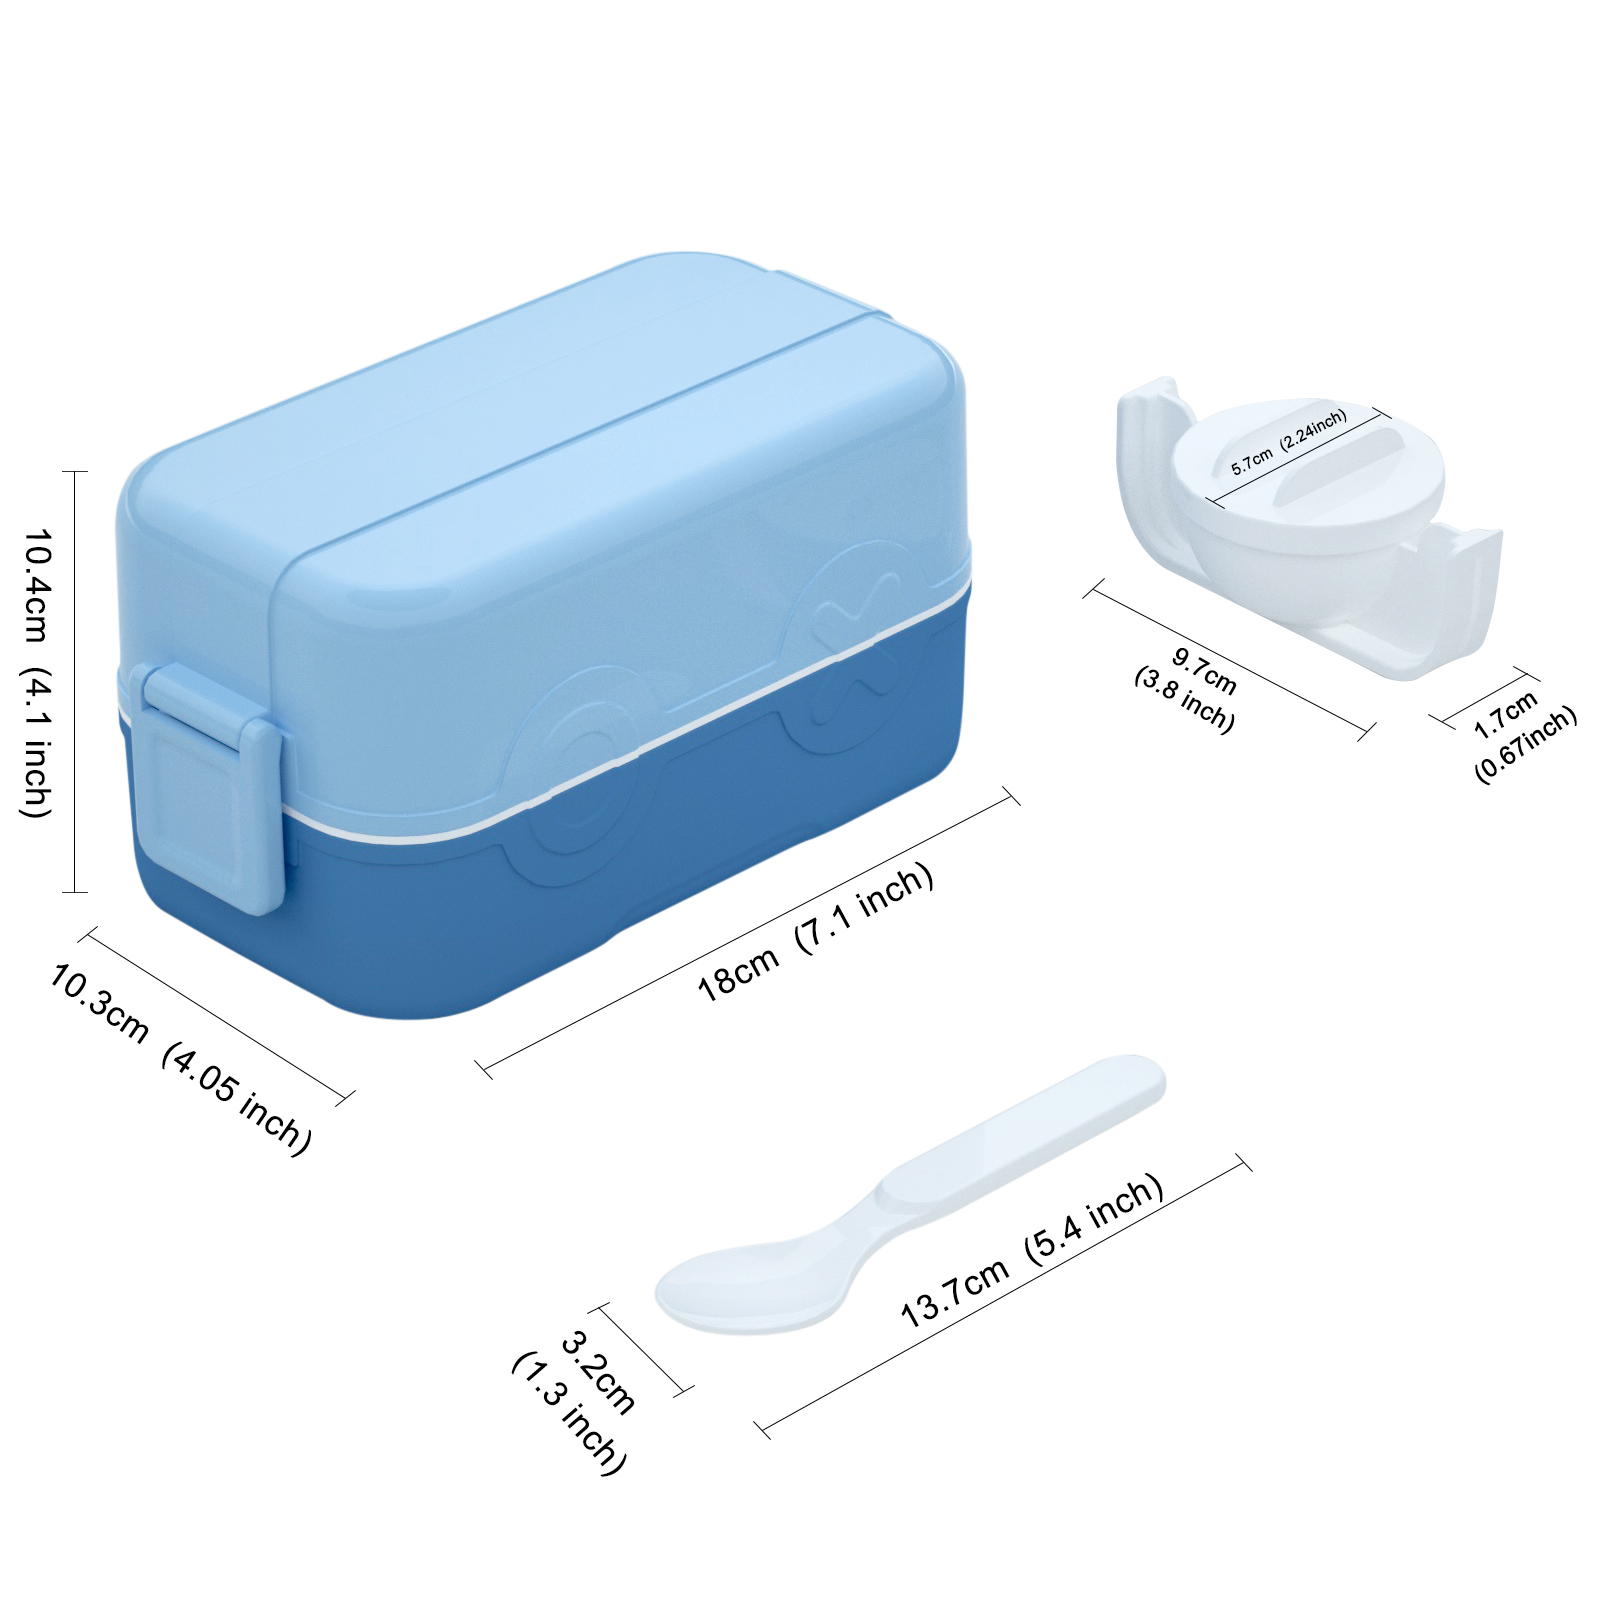 BPA-Free Bento Box Lunch Box Leak-Proof 3 Compartments Bento Box Kit With Detachable Divider